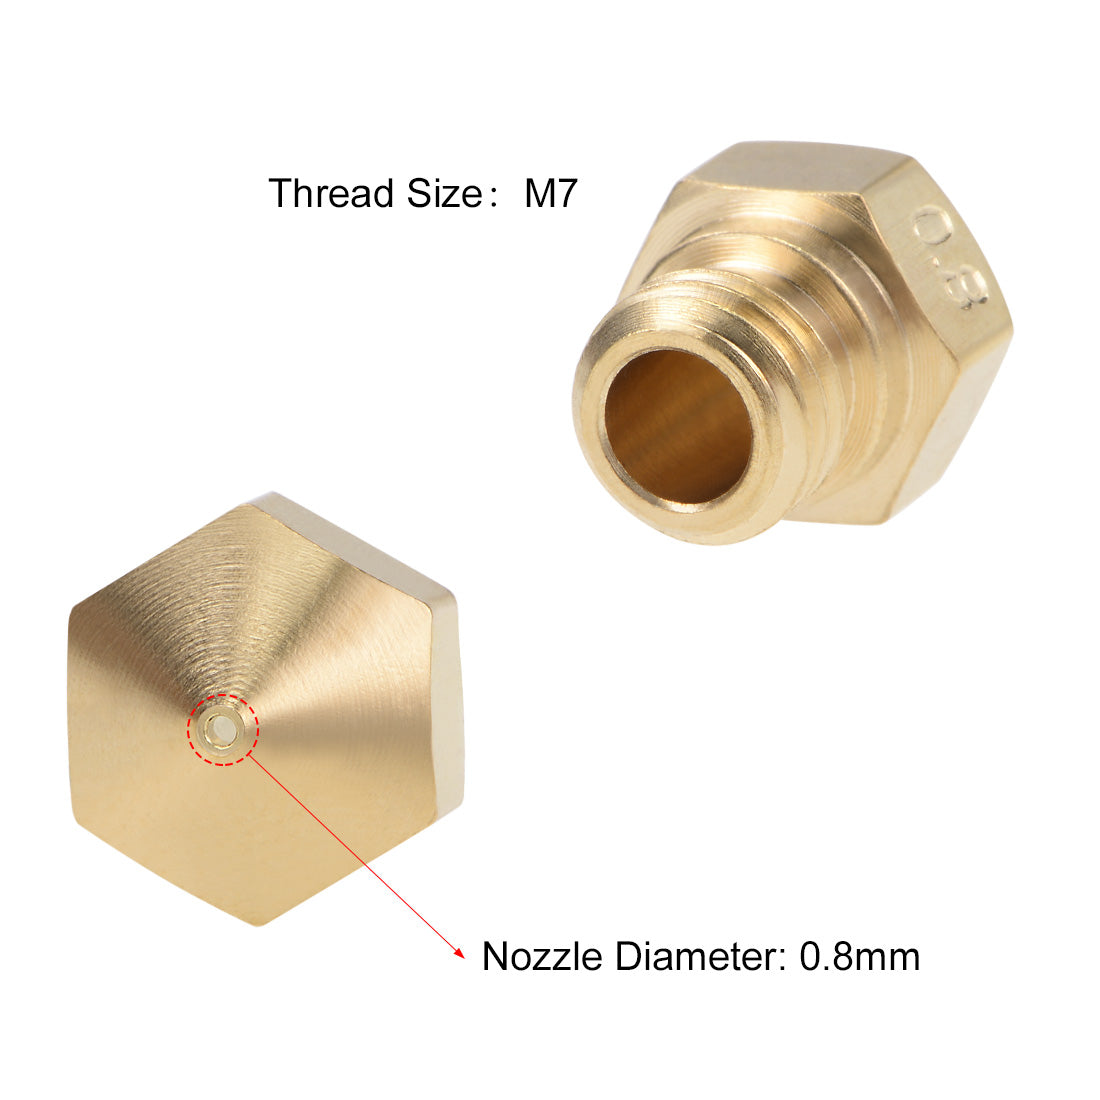 uxcell Uxcell 0.8mm 3D Printer Nozzle Head M7 Thread Replacement for MK10 1.75mm Extruder Print, Brass 10pcs